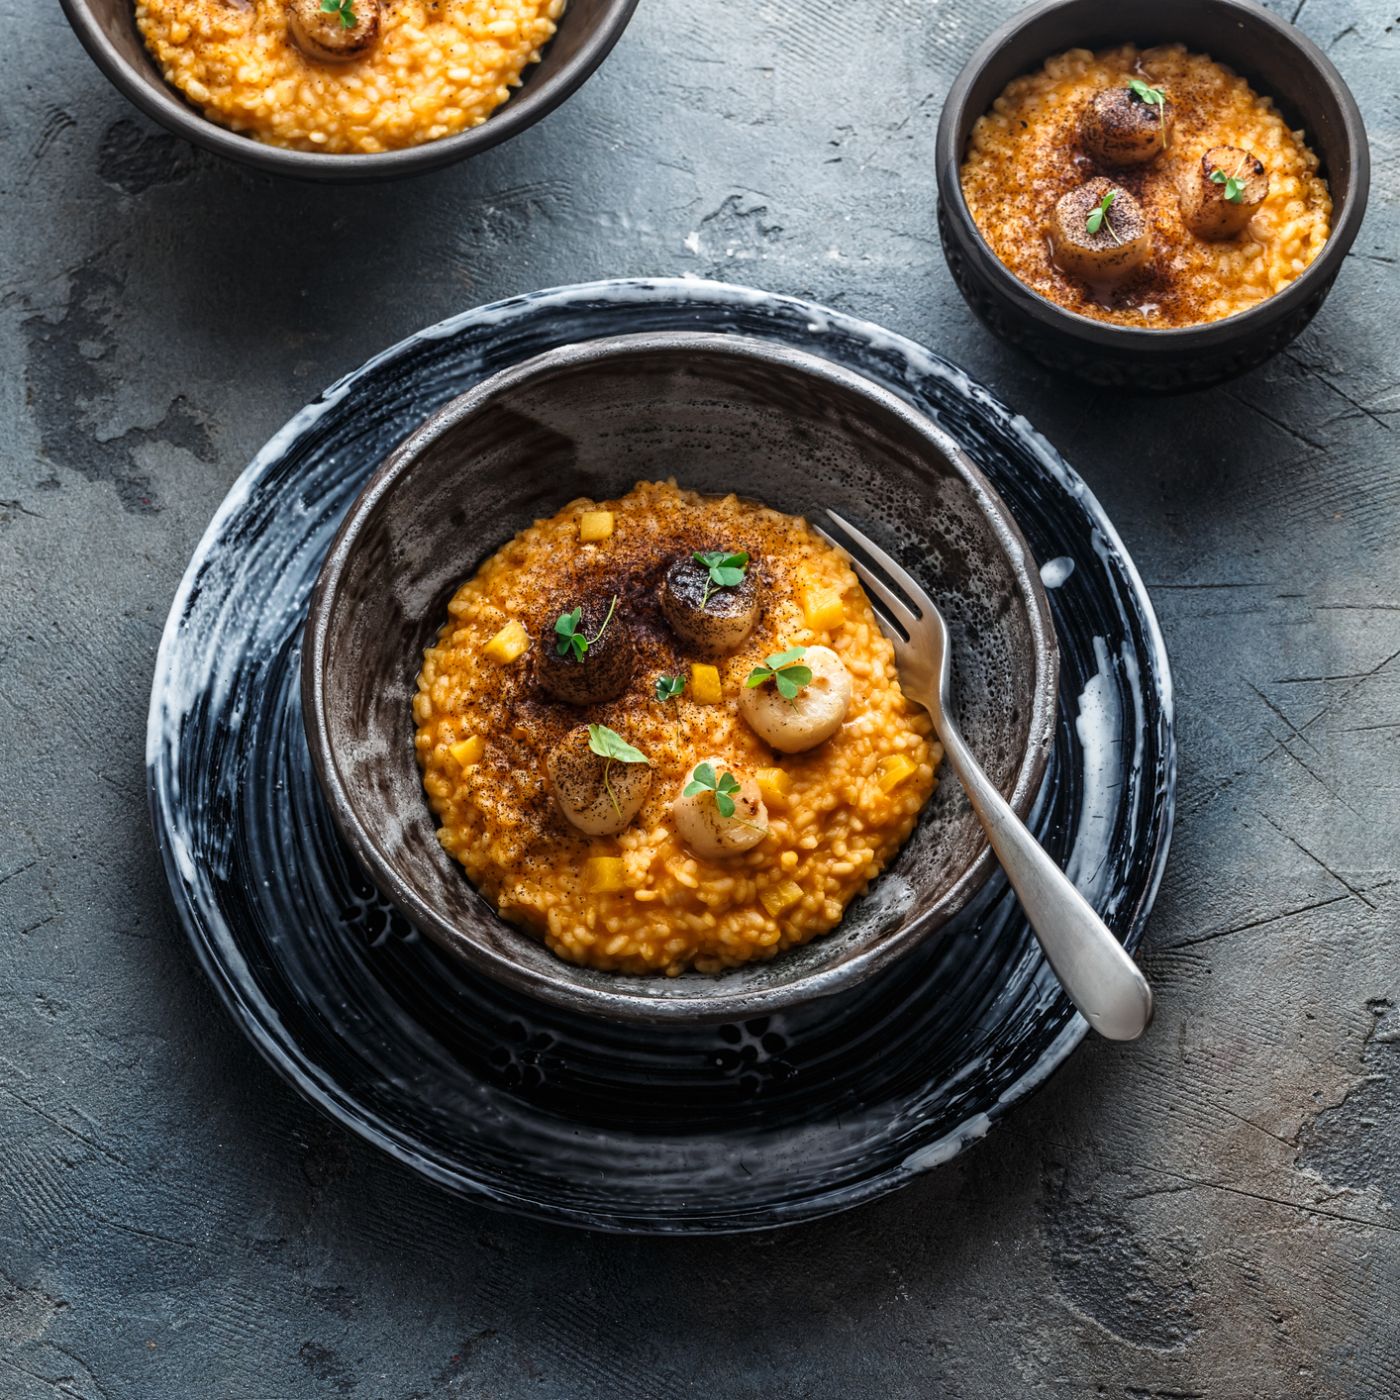 Risotto-with-pumpkin-and-scallops,-on-stone-background,-copy-space-1179223472_2125x1416 square.jpeg